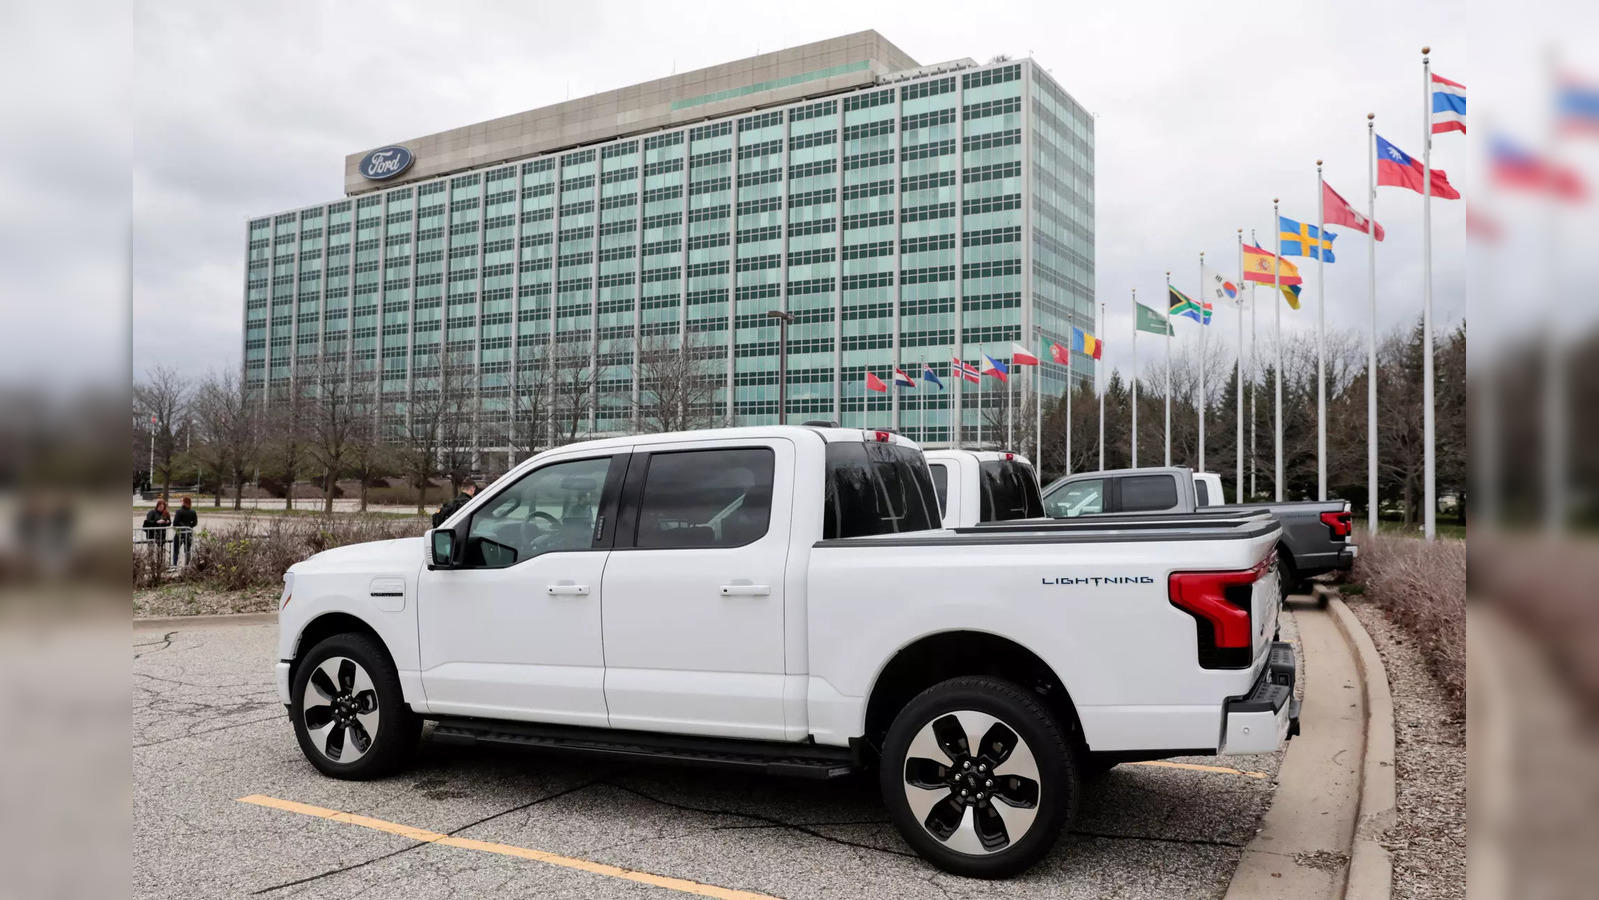 Ford slows EVs, sends a truckload of cash to investors - The Economic Times